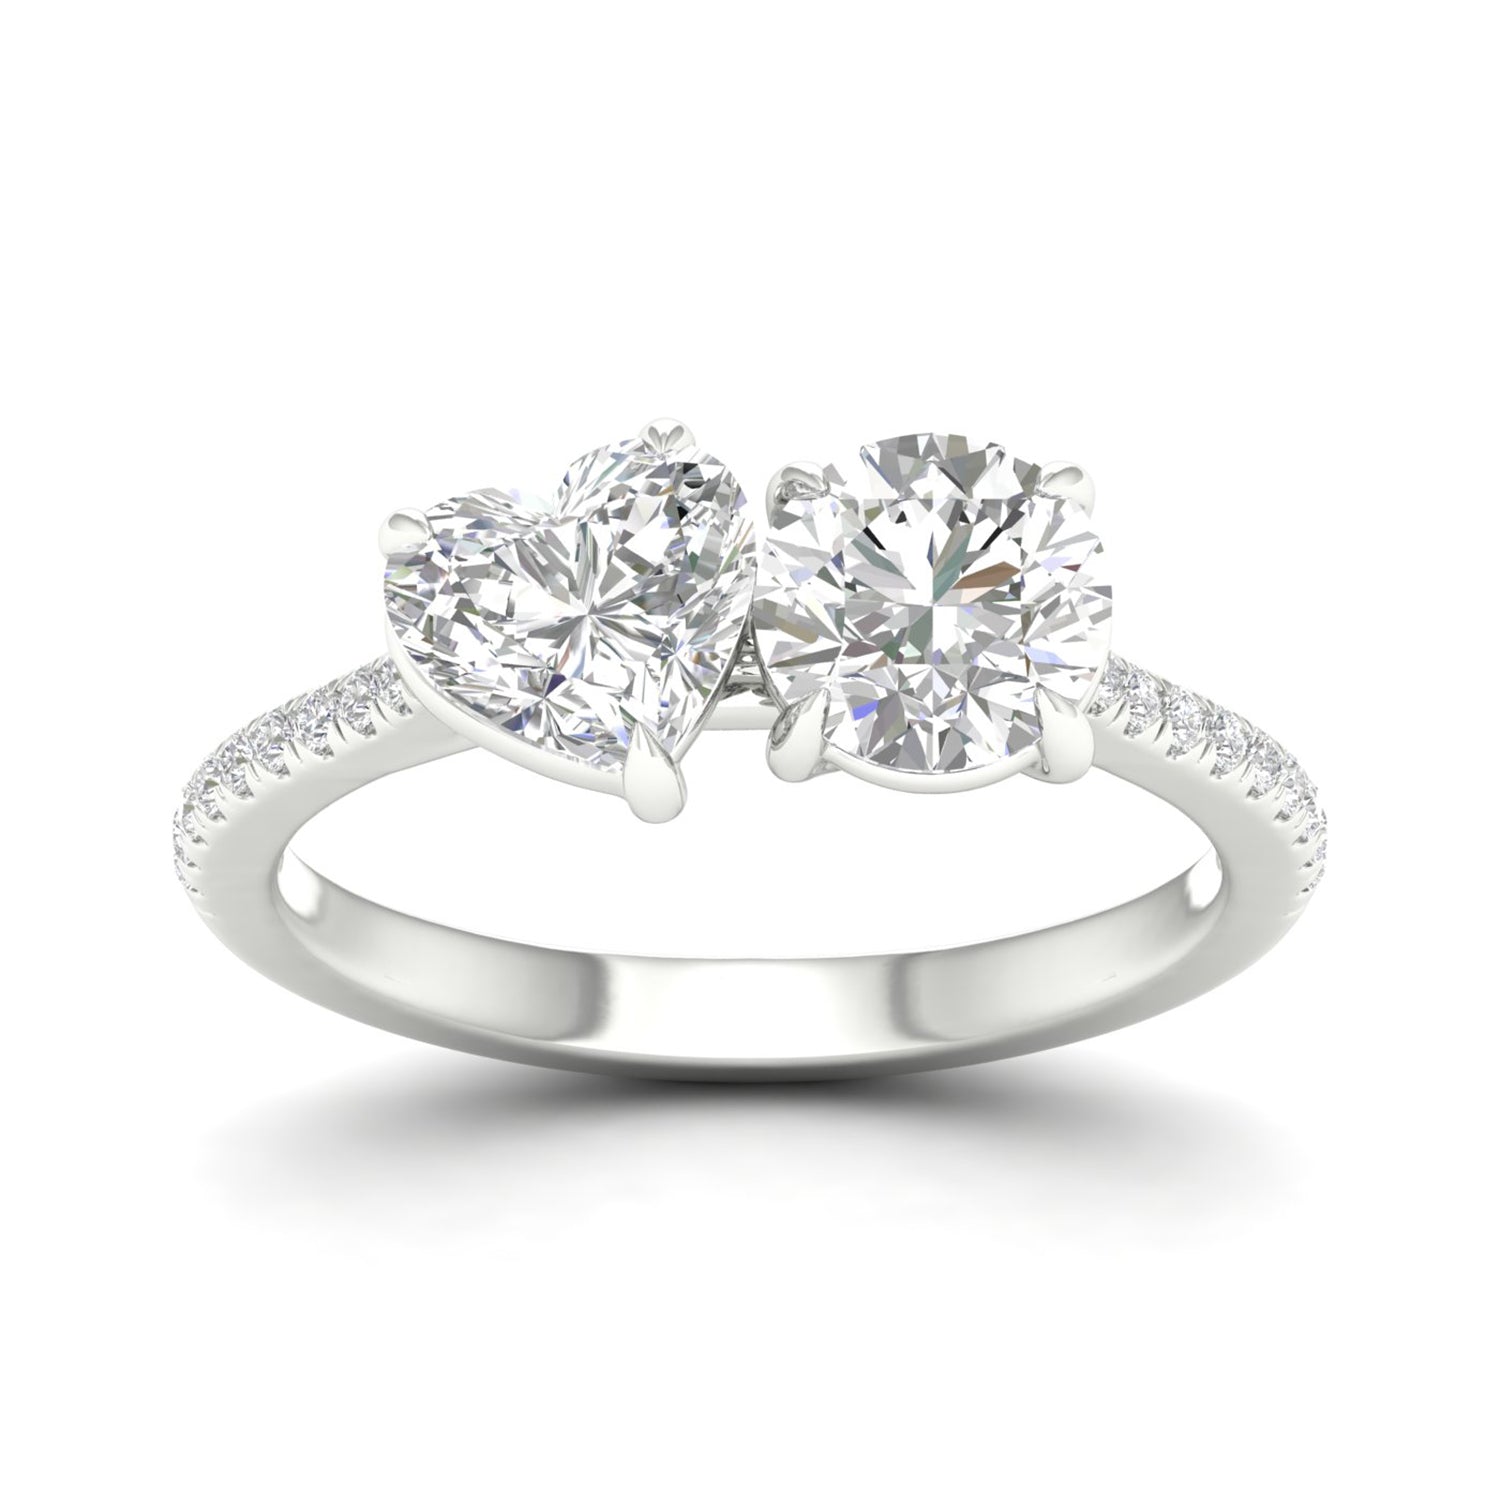 Atmos Heart Round Two Stone Diamond Ring_Product Angle_2 1/6 Ct. - 1